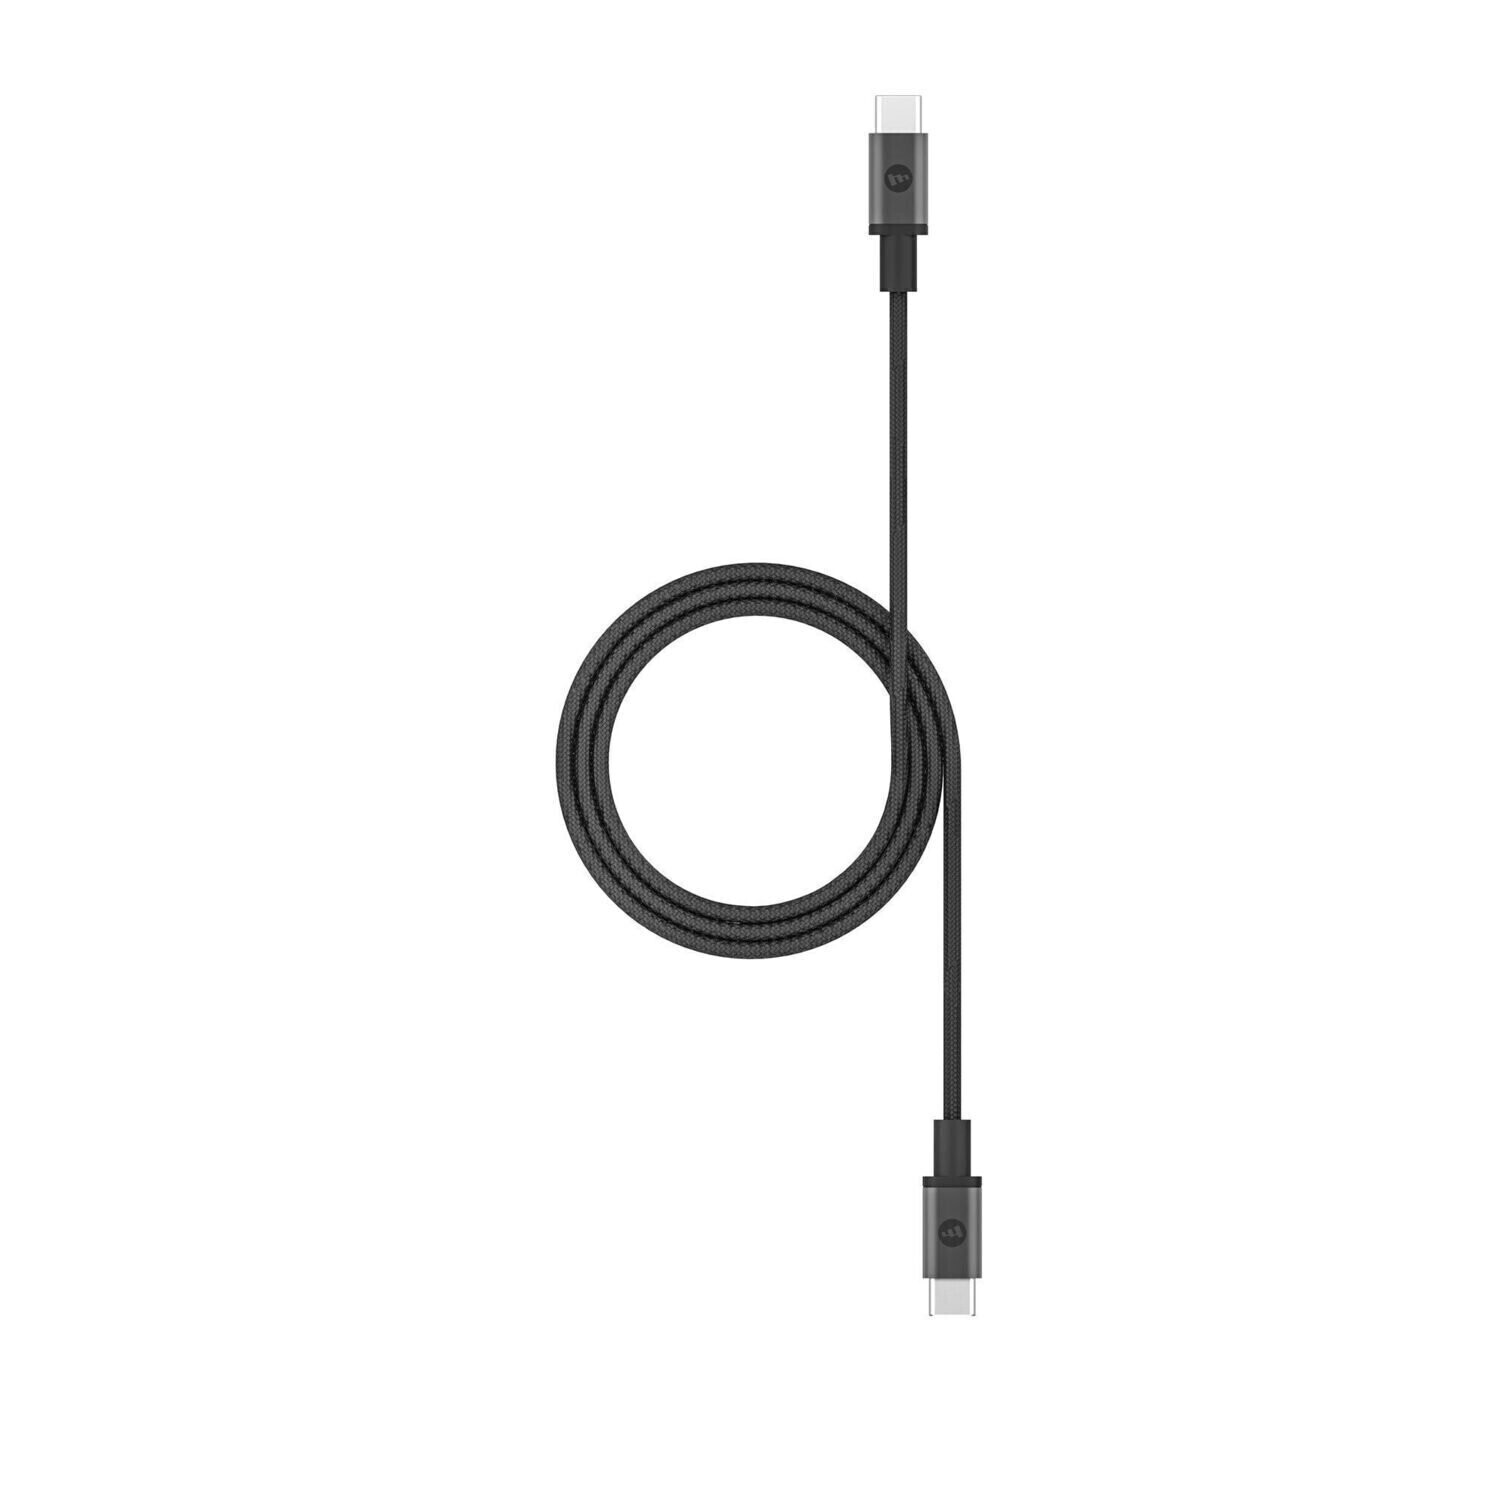 Mophie Cable USB-C to USB-C (1.5 Meter), Black